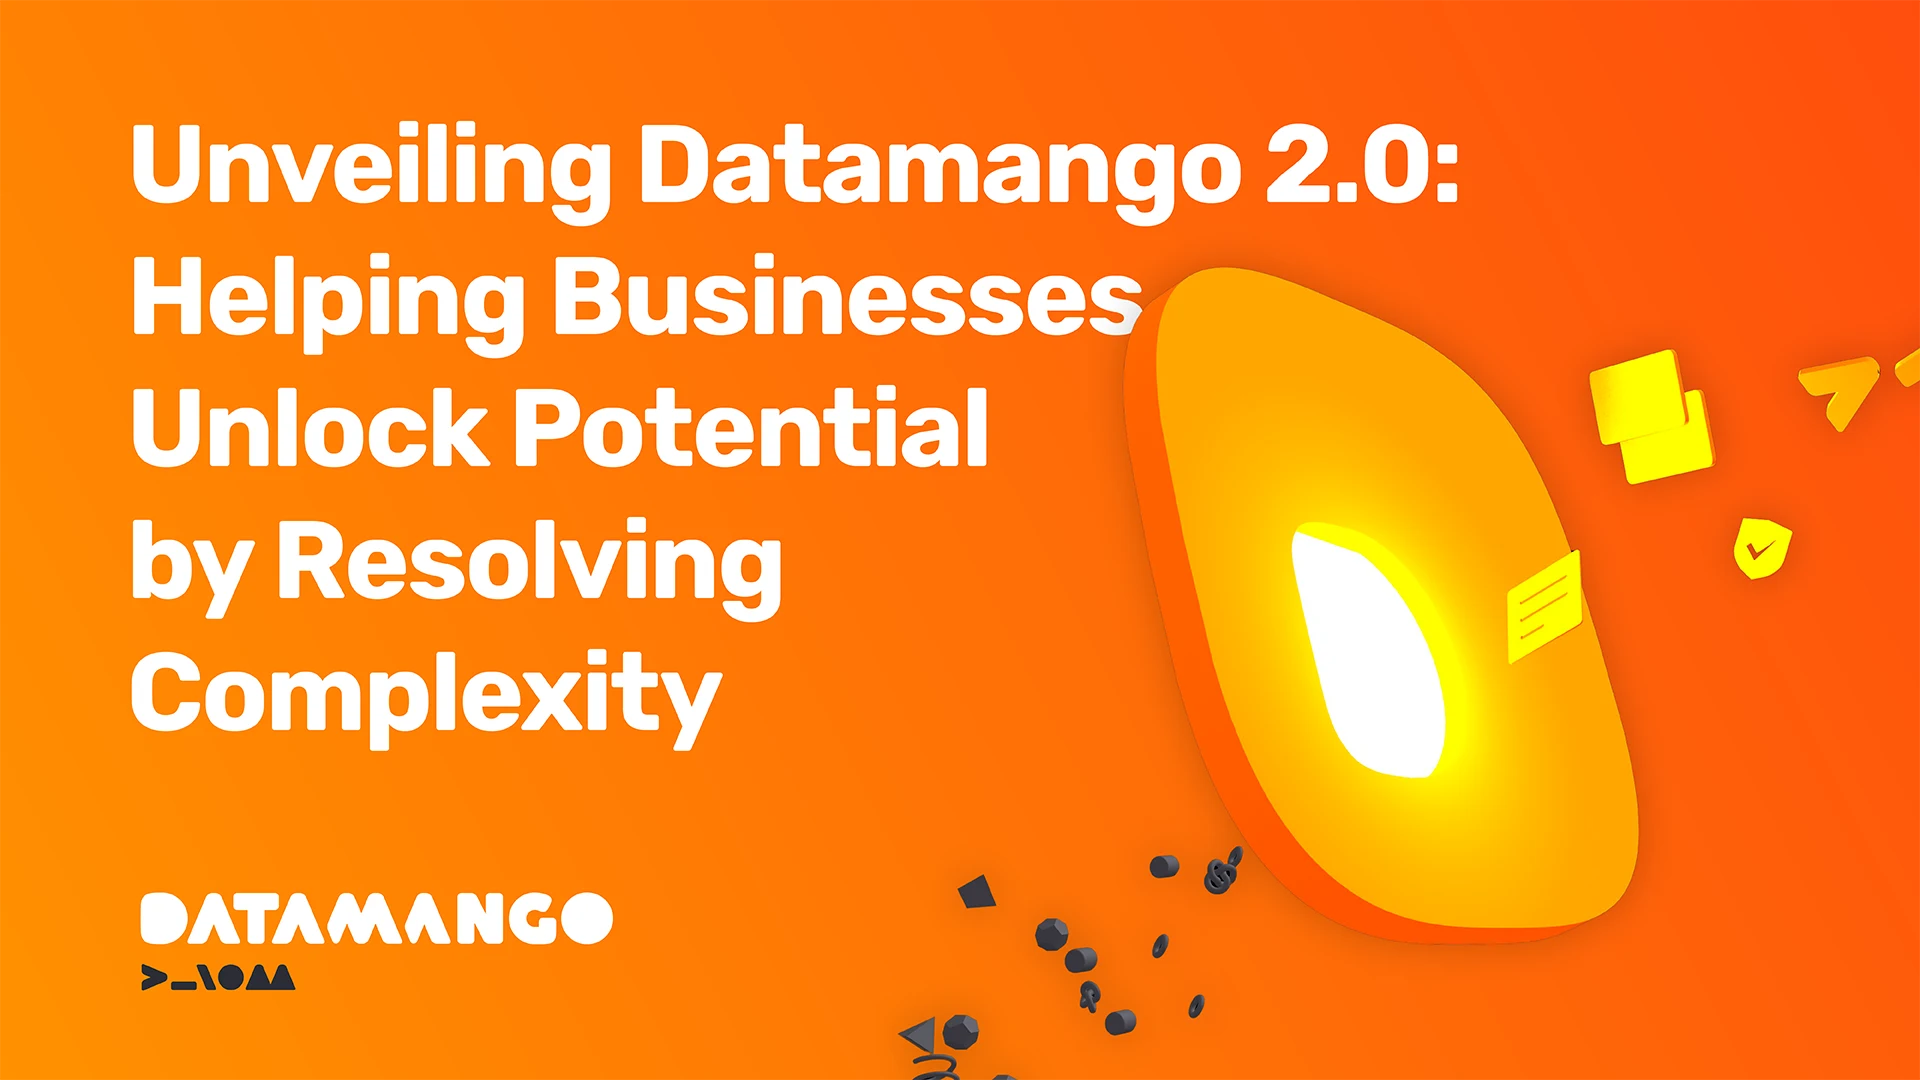 datamango-v2-helping-businesses-unlock-potential-resolving-complexity